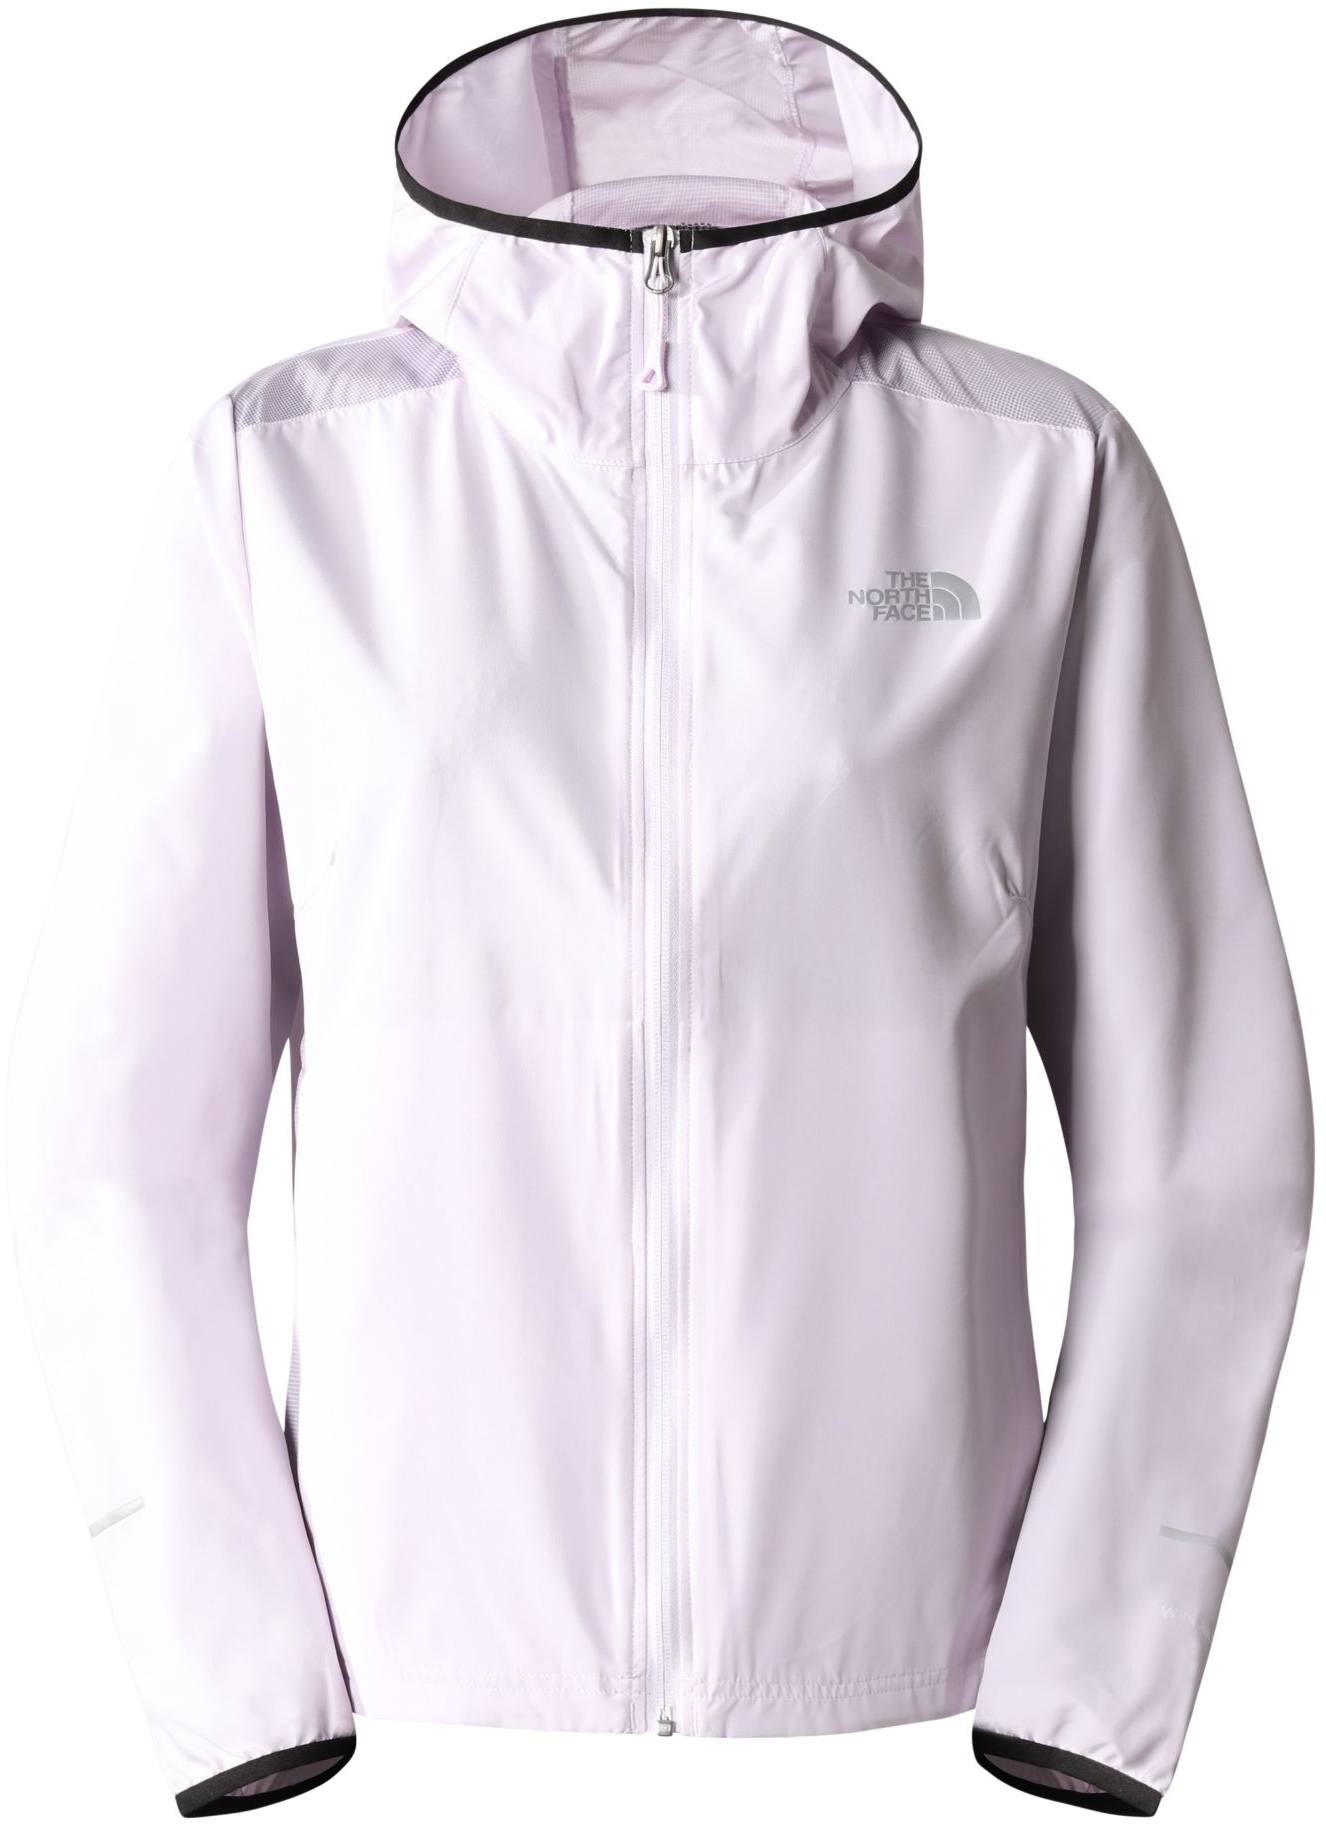 The North Face Women’s Running Wind Jacket